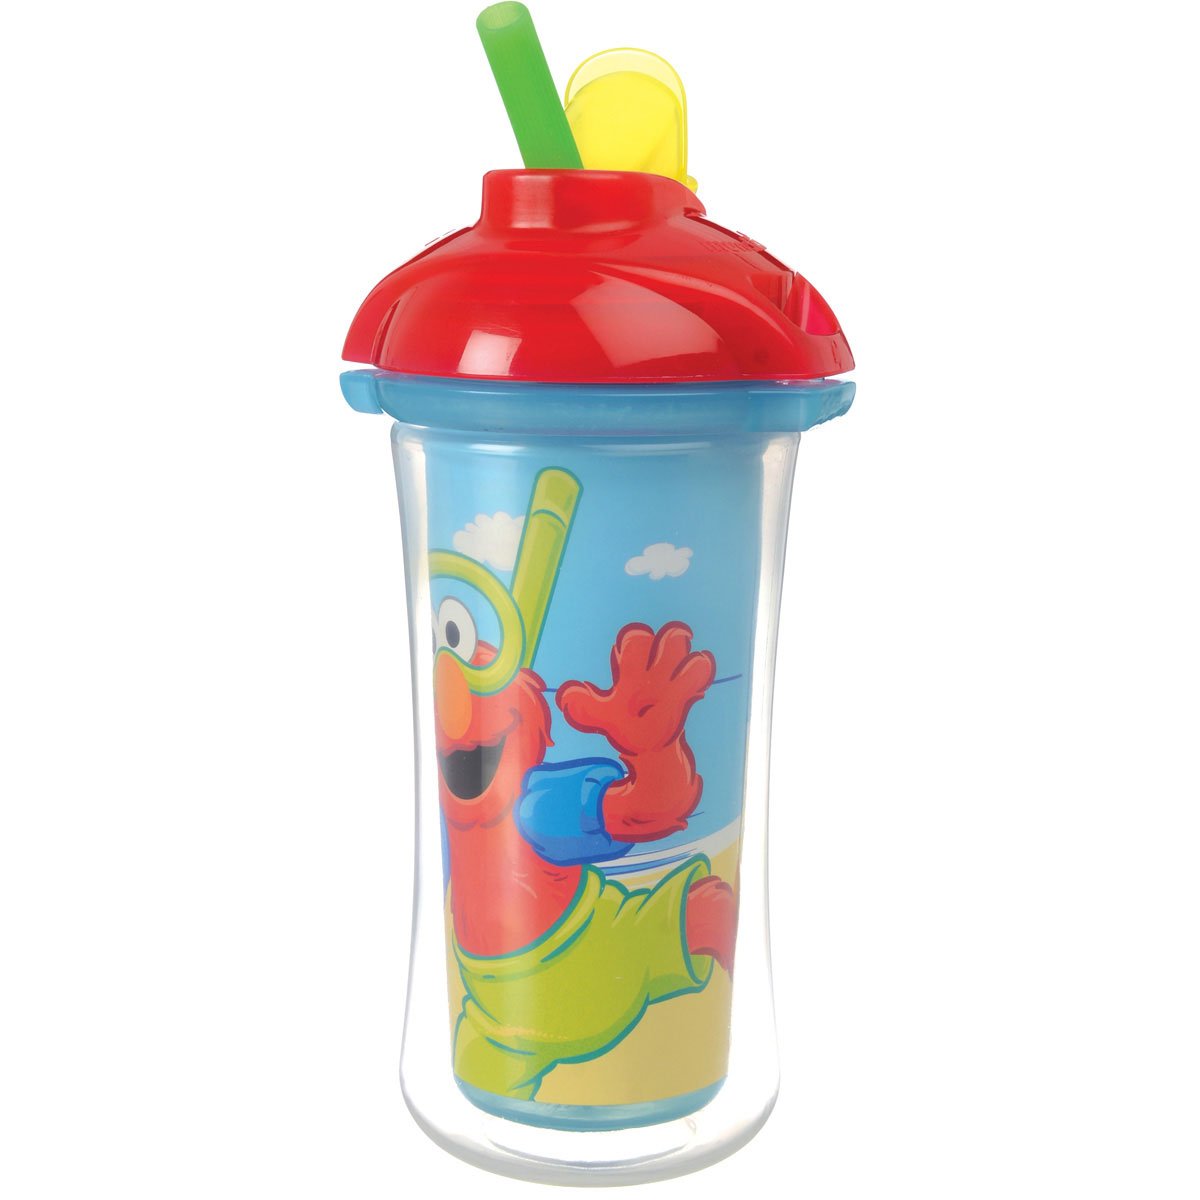 Munchkin Sesame Street Insulated Straw Cup, 9 Ounce, Colors May